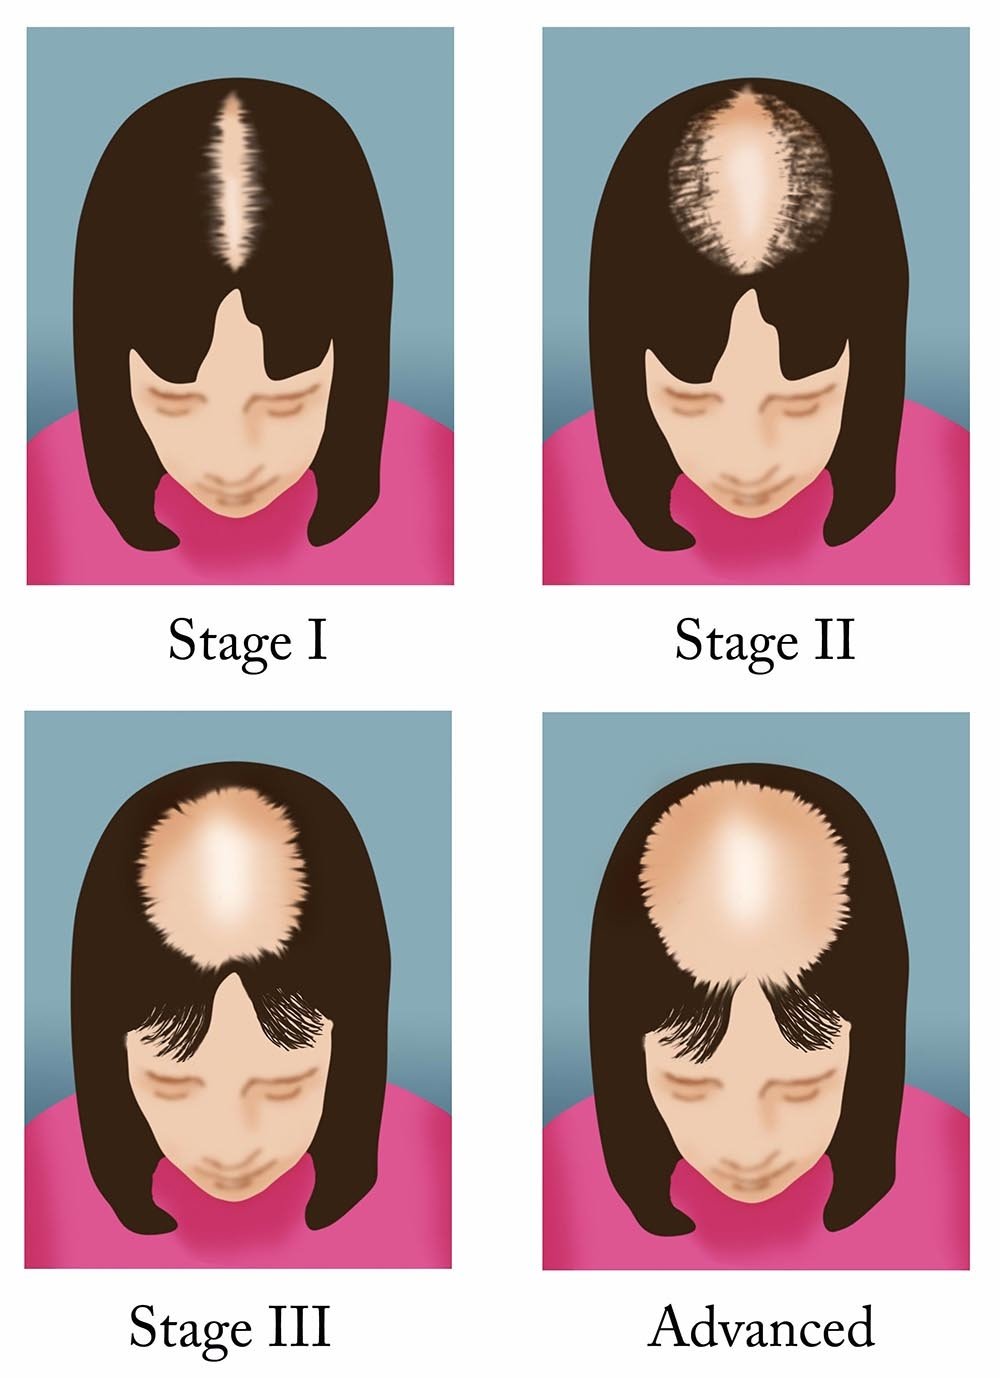 Read This Before Your Decide On Your Hair Loss Treatment ...